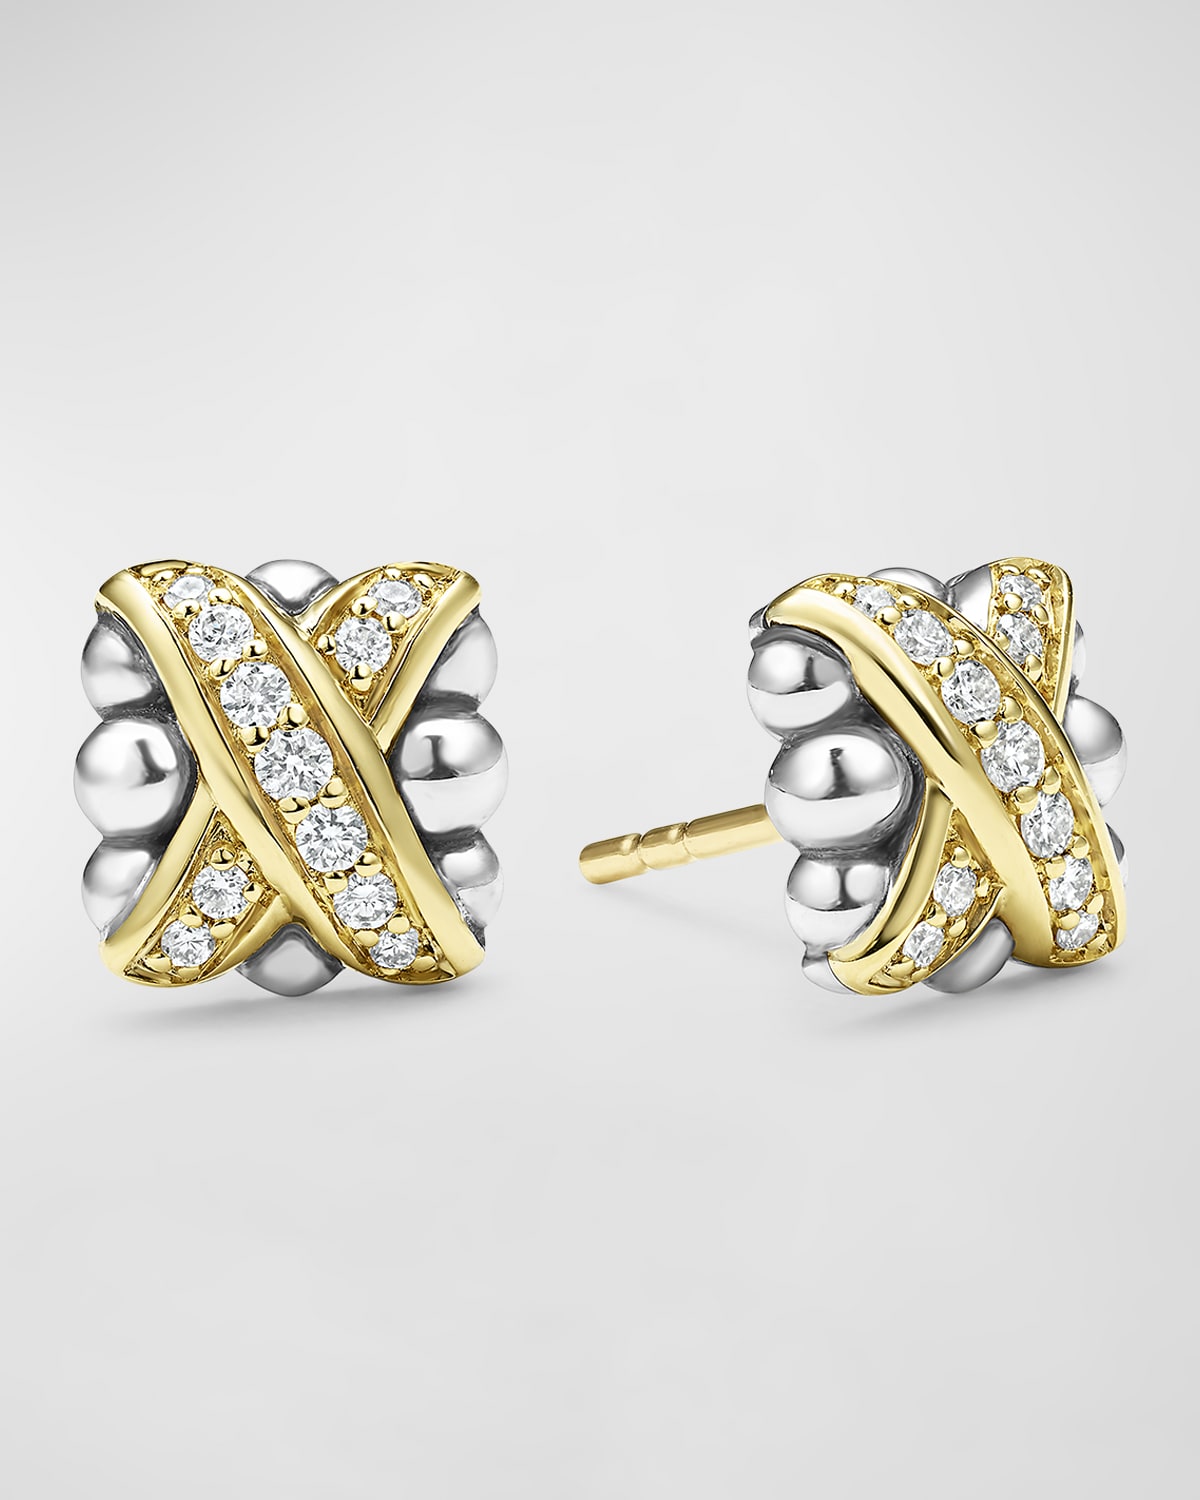 Embrace Sterling Silver and 18K Gold Diamond Stud Earrings, 8mm